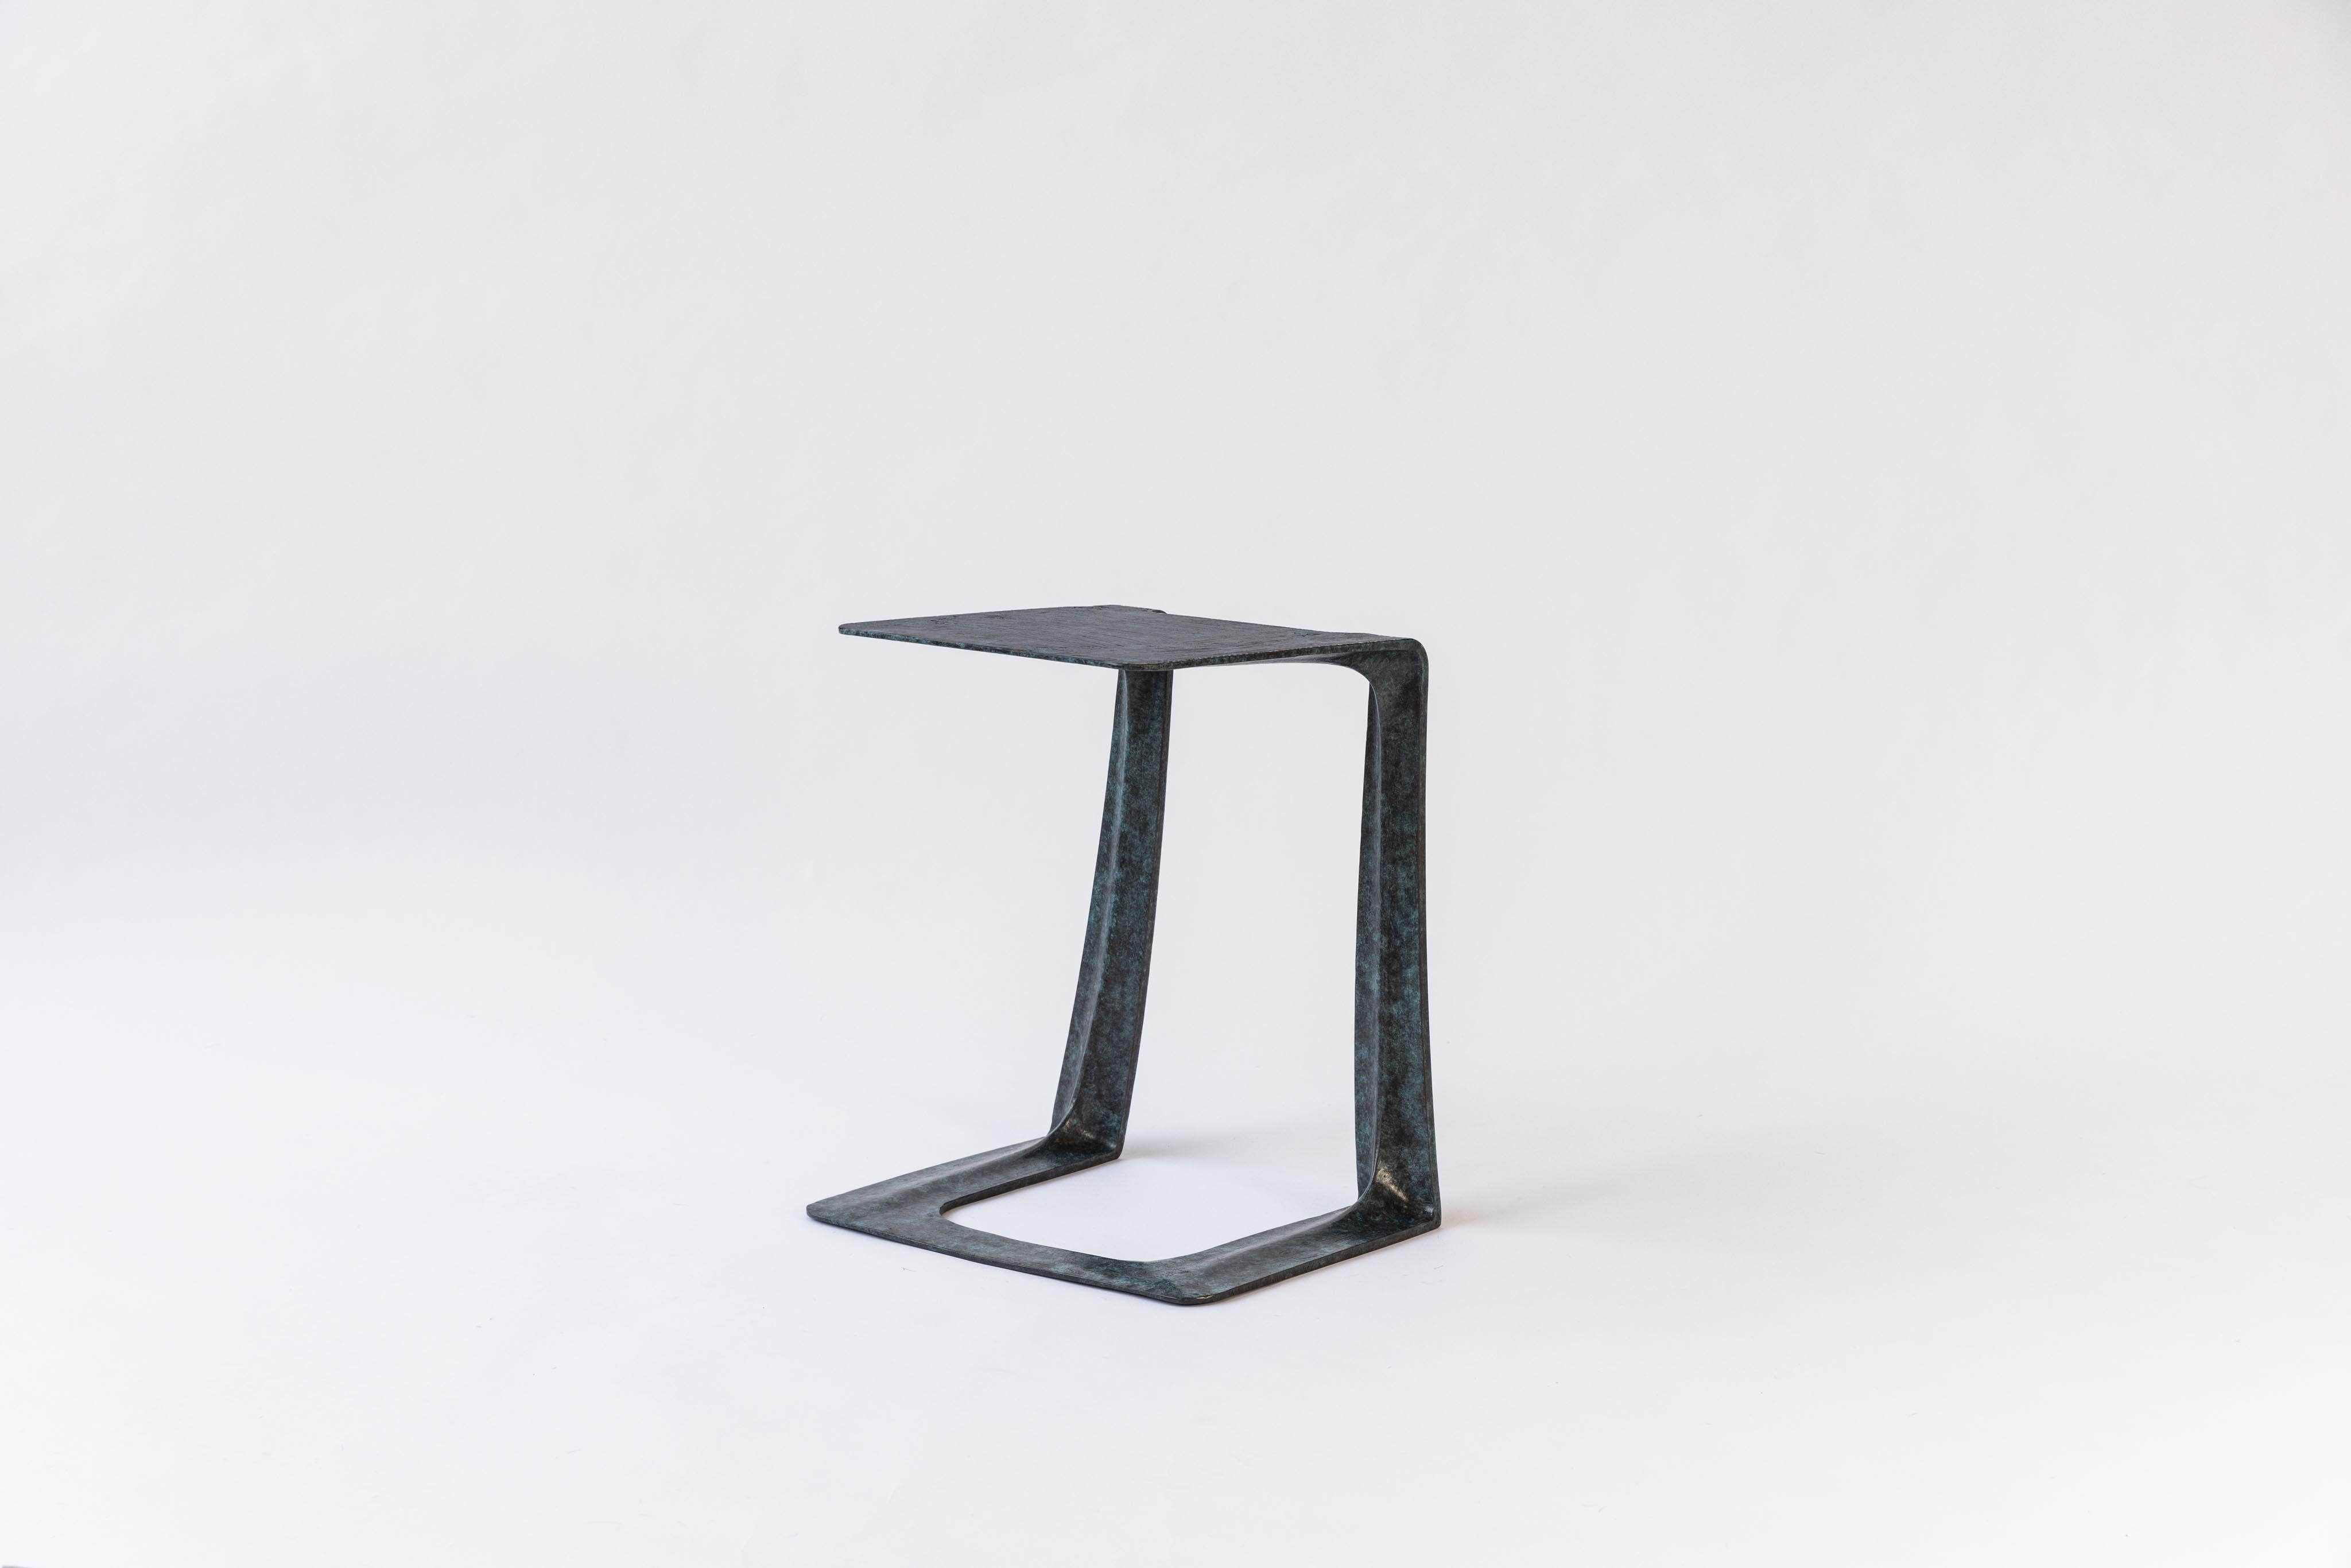 The most recent addition to the Garrison Series is a Green/Blue patina variant of the initial award-winning design conceived in early 2015. The Garrison is a sculptural casting intended for use as a stool or side table, derived from state-of-the-art